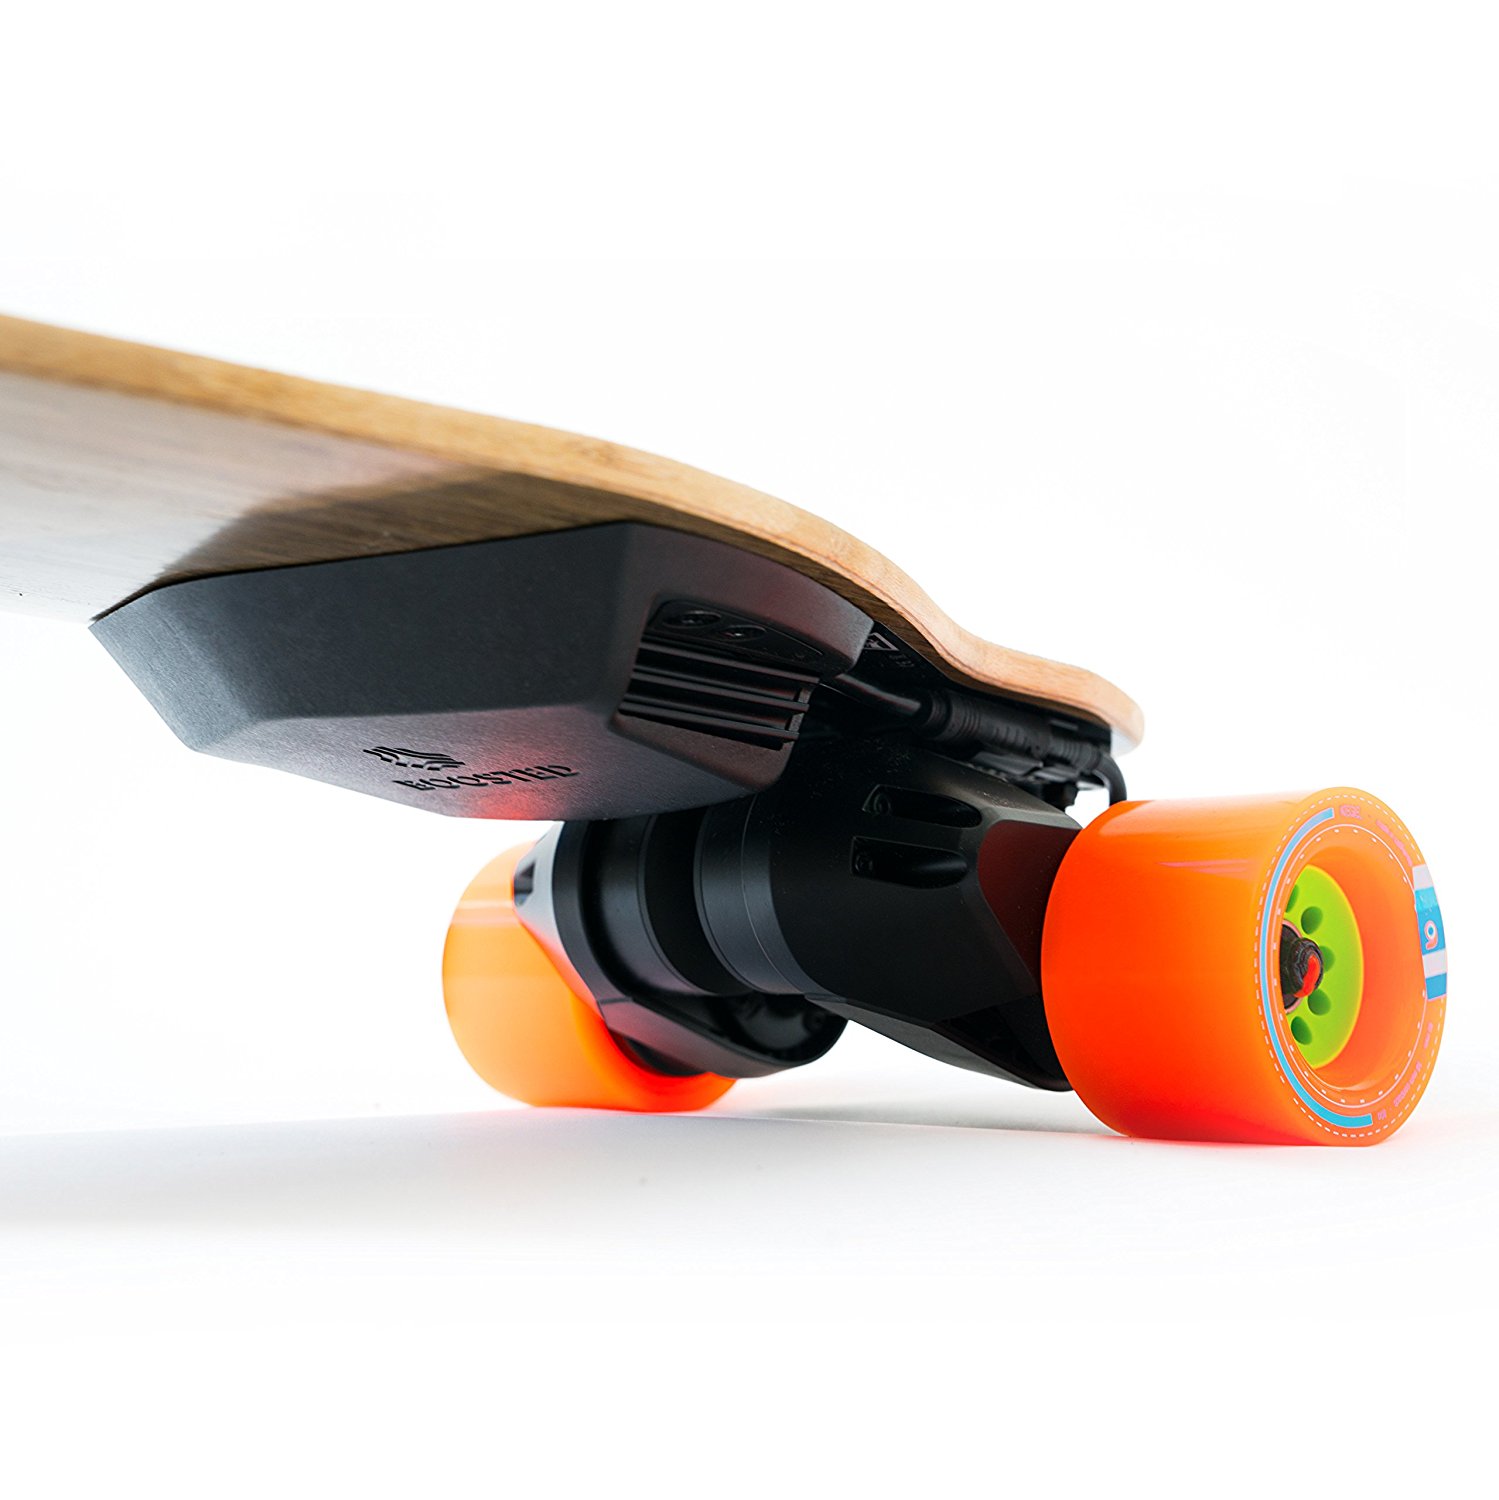 Boosted-Plus-2nd-generation-longboard-2